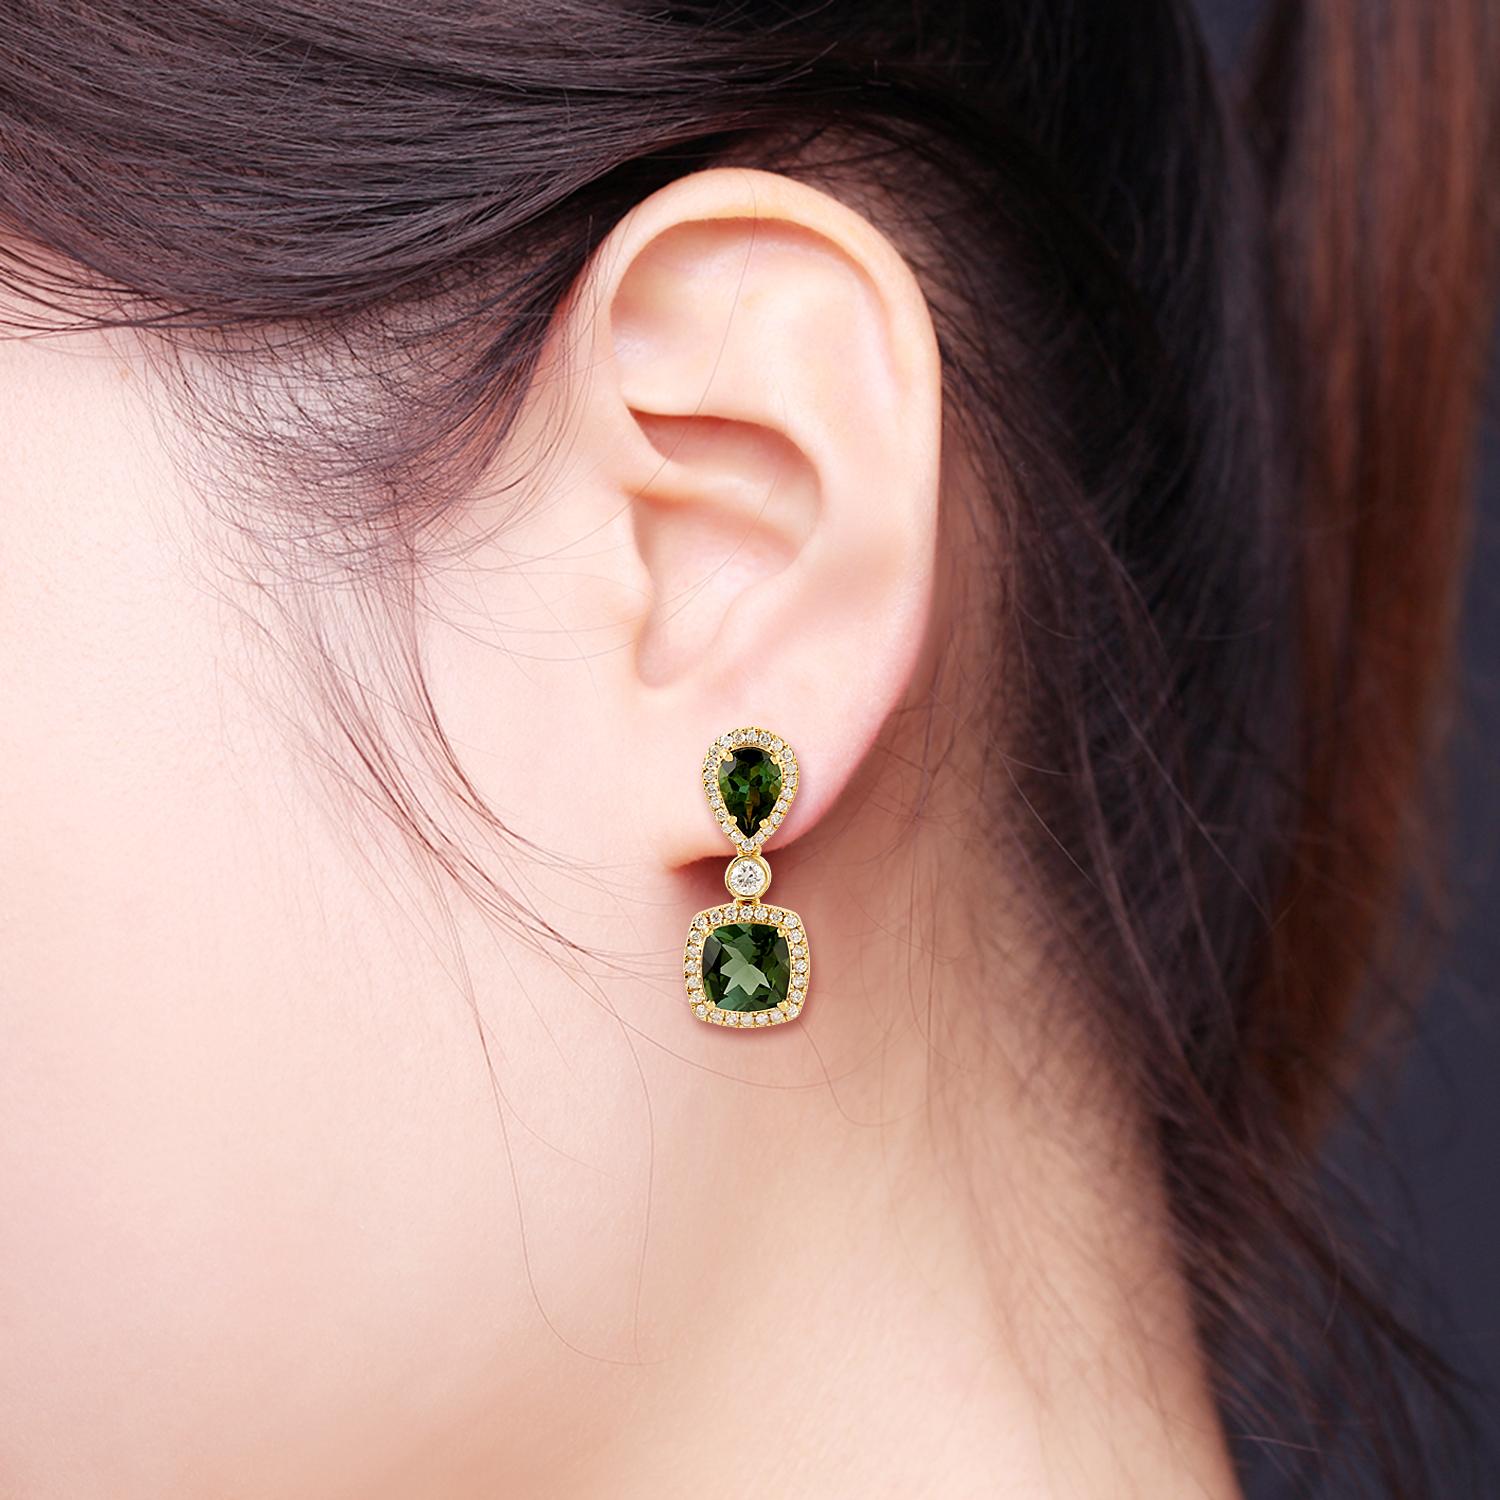 These beautiful drop earring are handcrafted in 18-karat gold. It is set with 3.94 carats tourmaline and .64 carats of glimmering diamonds.

FOLLOW  MEGHNA JEWELS storefront to view the latest collection & exclusive pieces.  Meghna Jewels is proudly